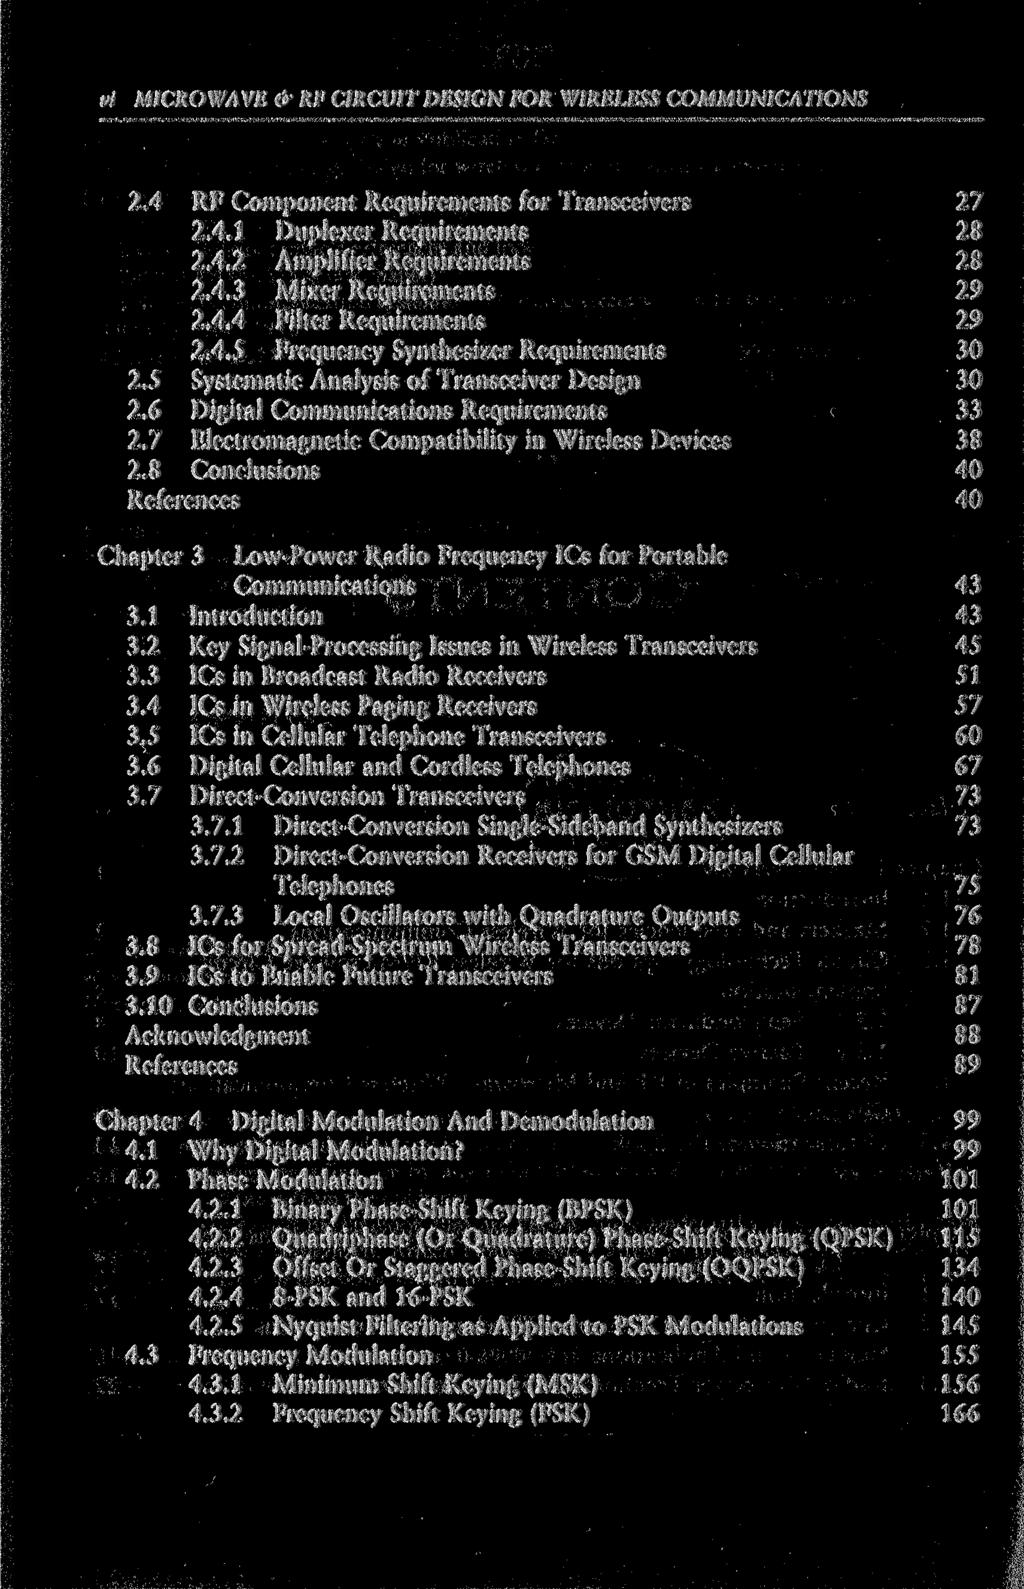 vi MICROWAVE & RF CIRCUIT DESIGN FOR WIRELESS COMMUNICATIONS 2.4 2.5 2.6 2.7 2.8 References Chapter 3 3.1 3.2 3.3 3.4 3.5 3.6 3.7 3.8 3.9 3.10 RF Component Requirements for Transceivers 2.4.1 Duplexer Requirements 2.